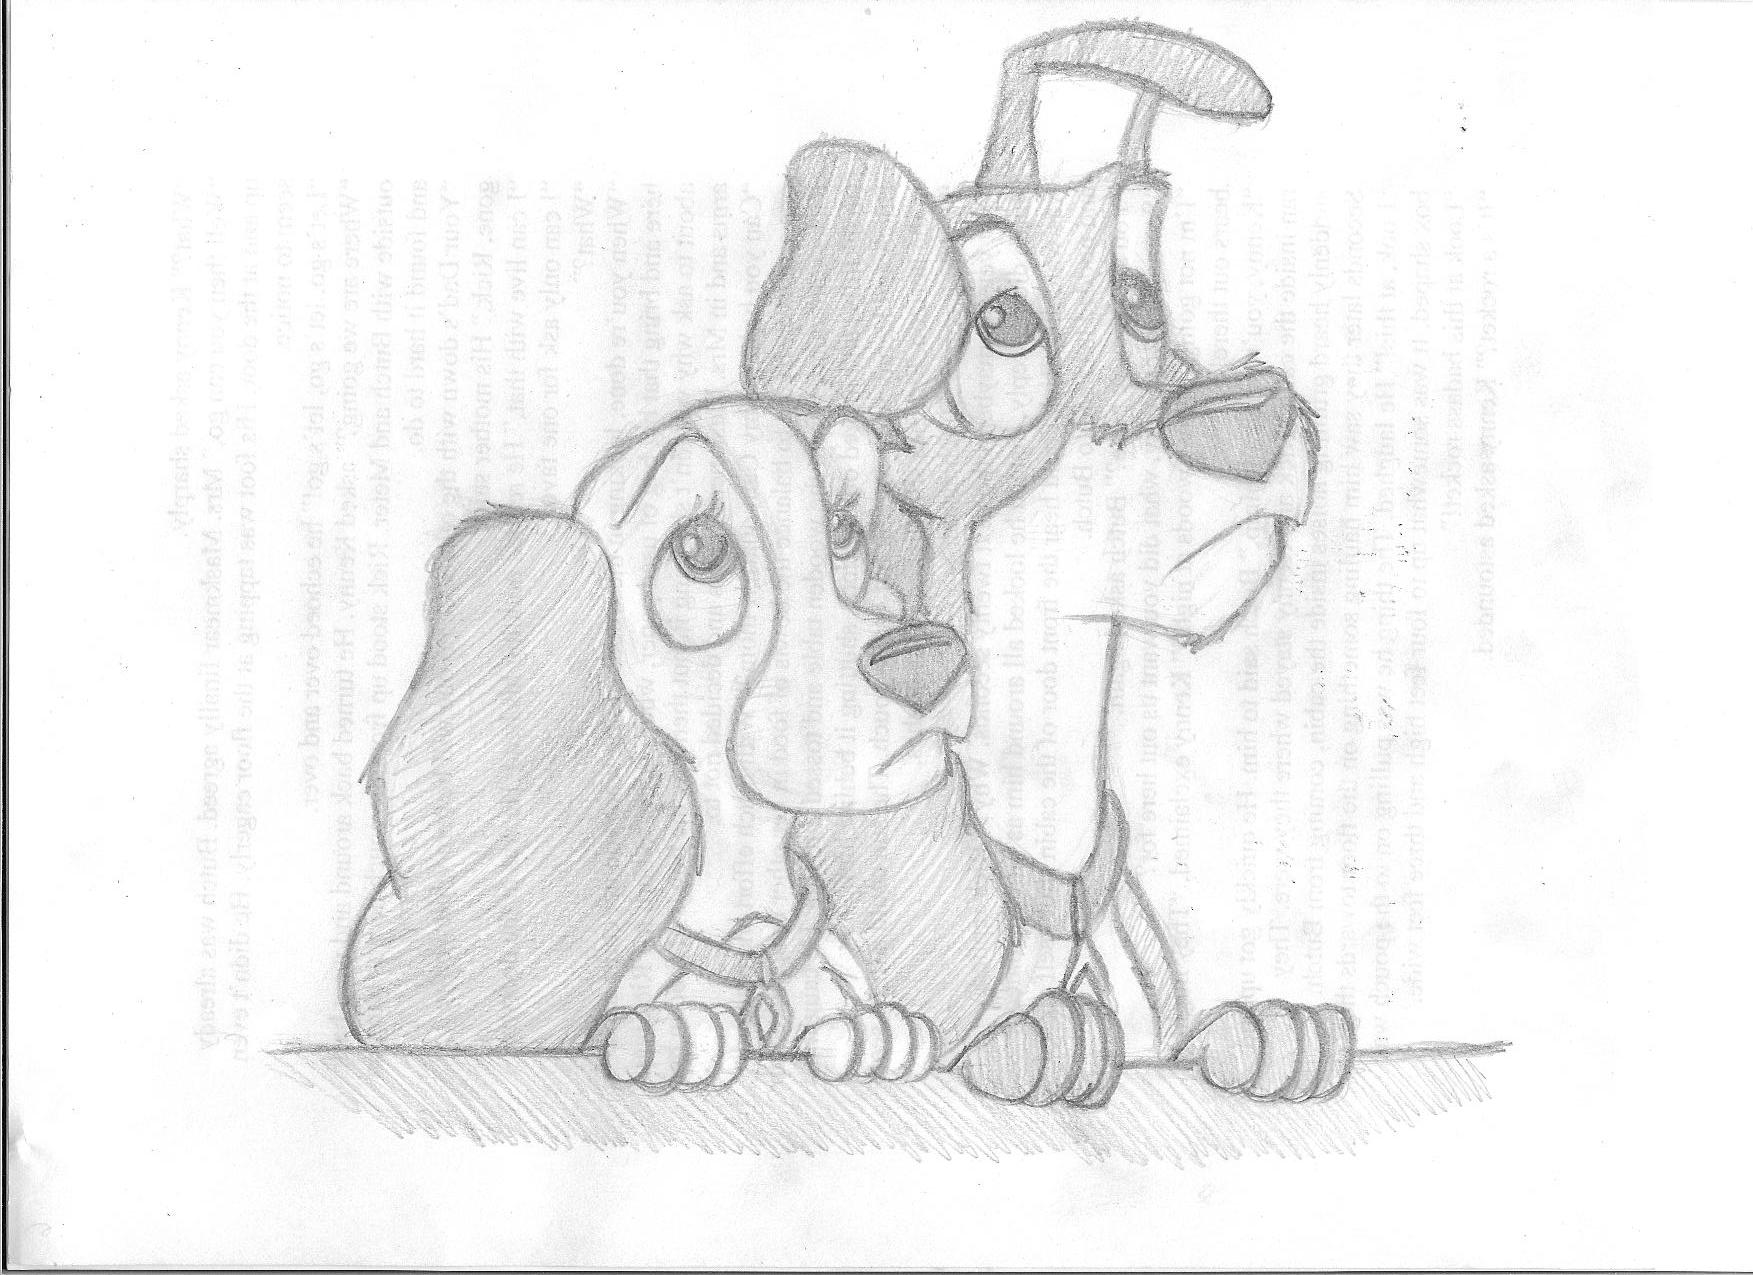 Lady and the Tramp by SidStillHere